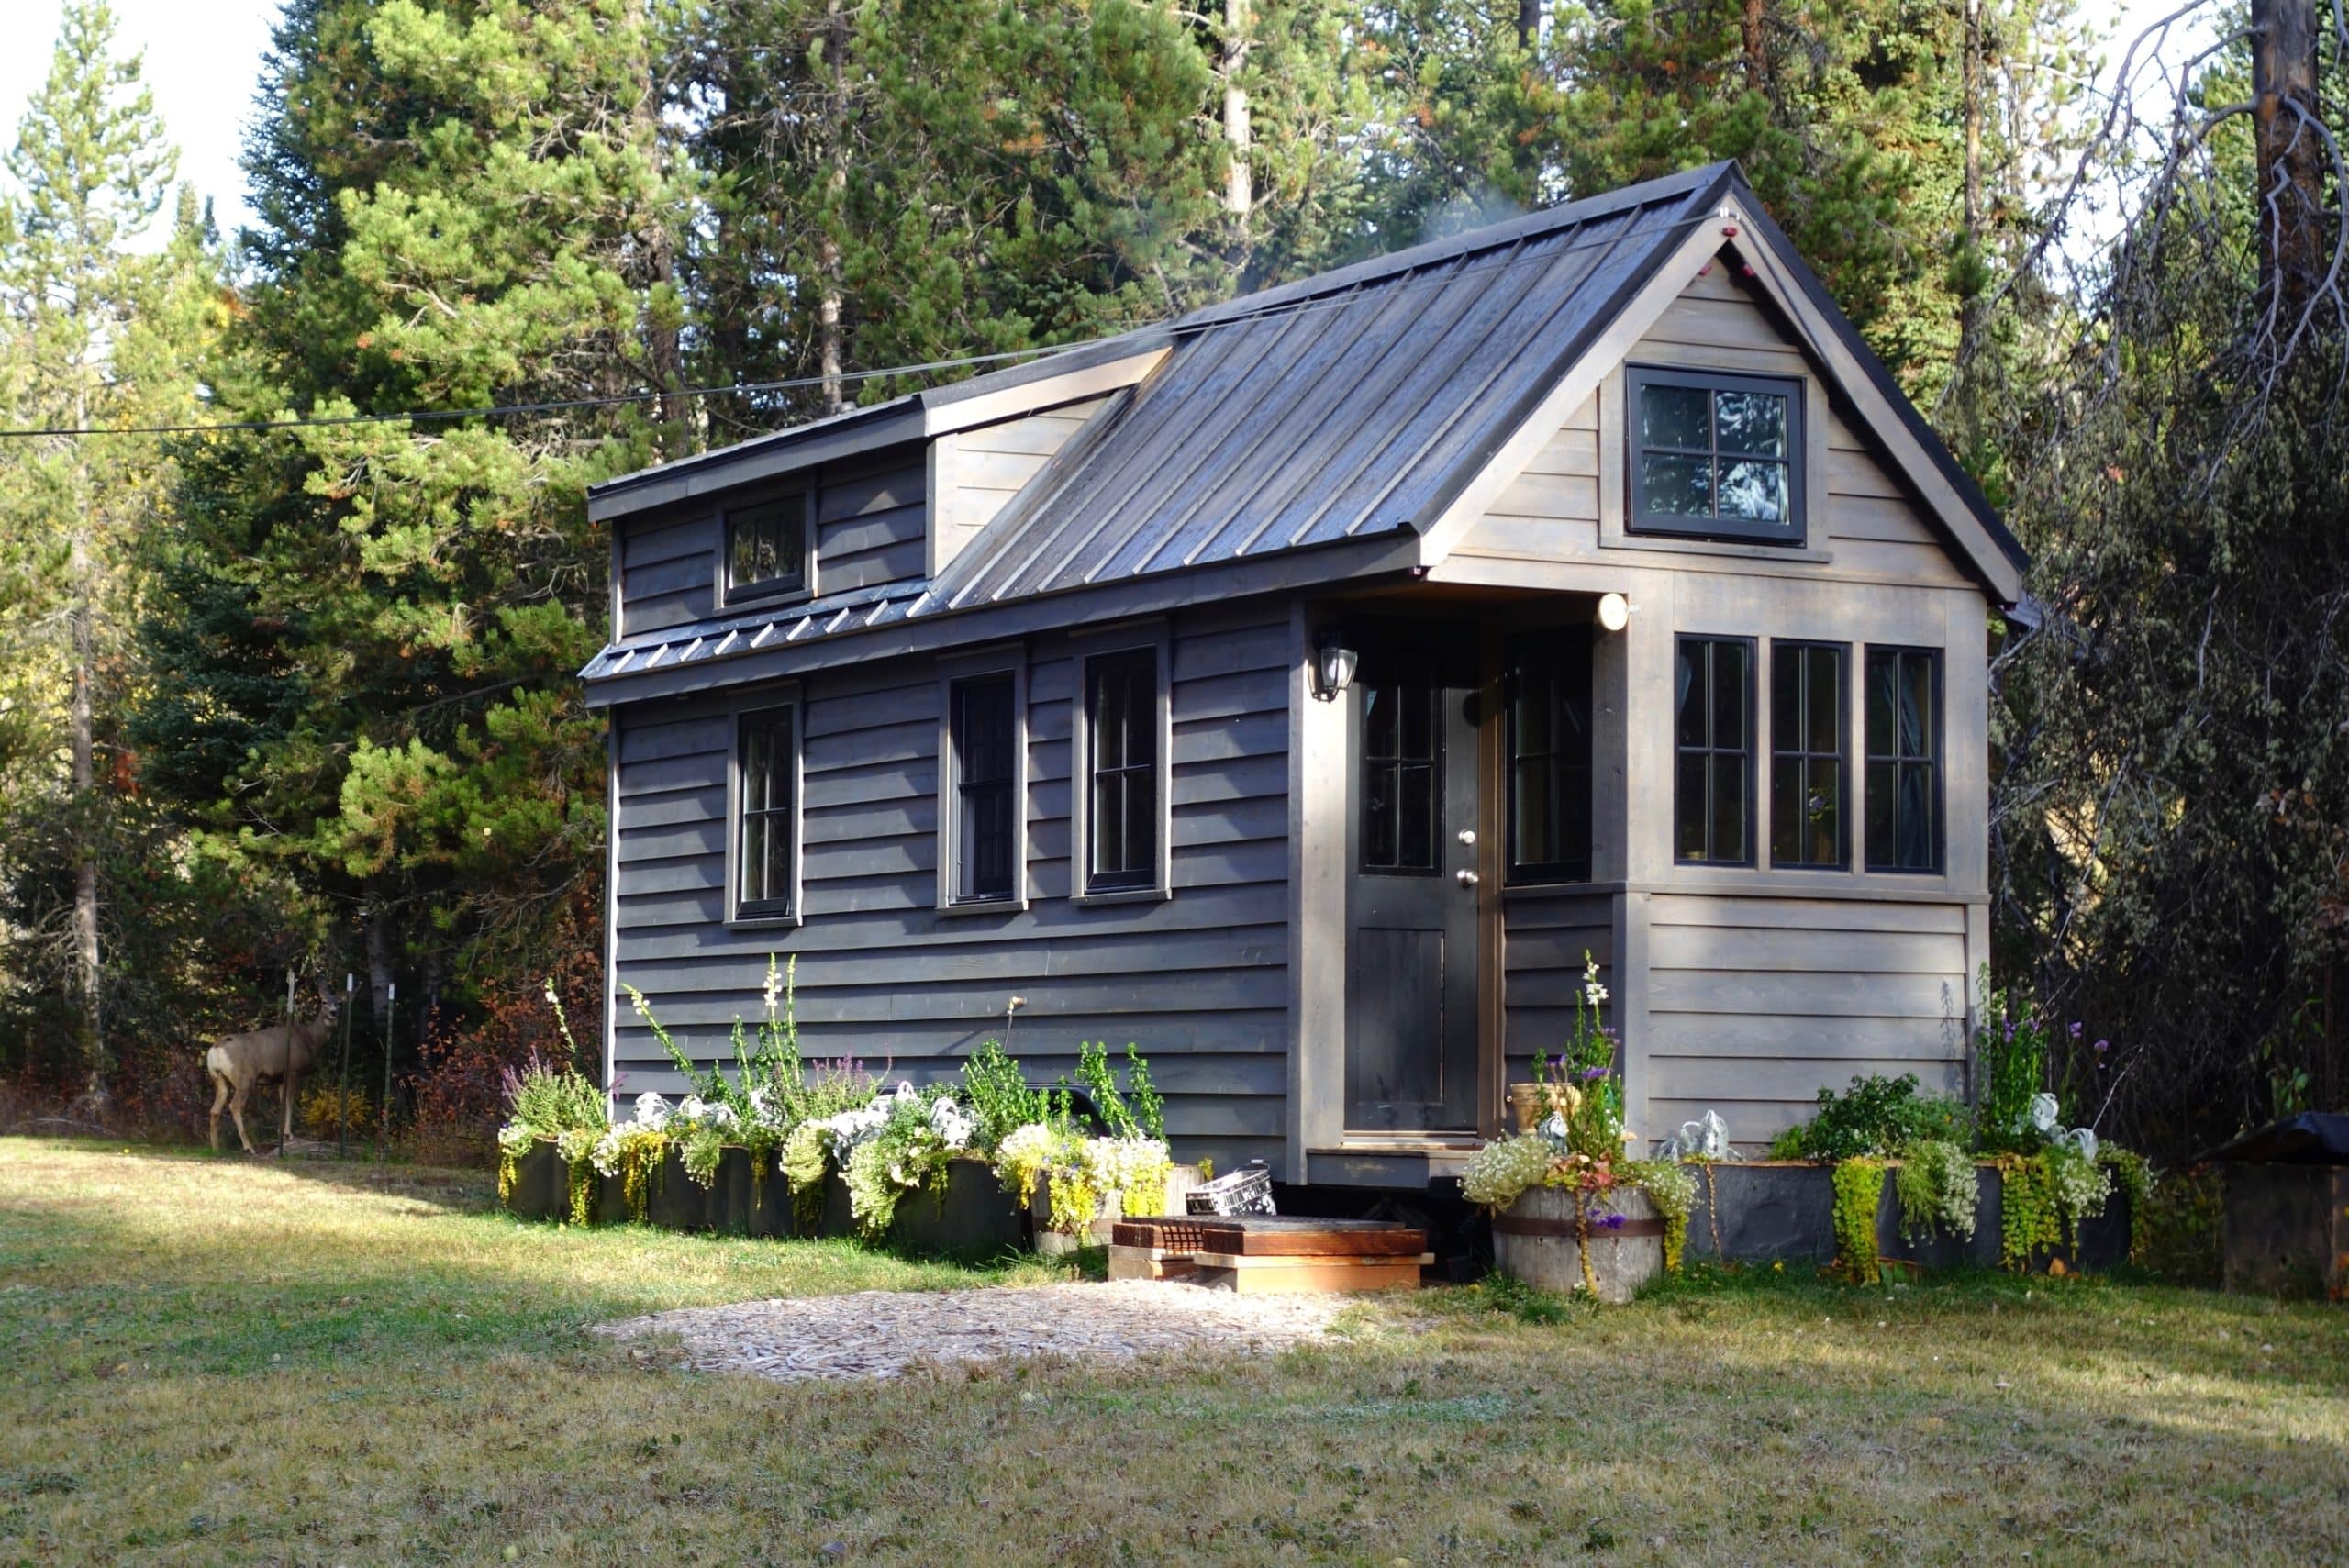 A tiny home built with contractor financing has grey siding and many windows. It sits nestled at the edge of wooded land.